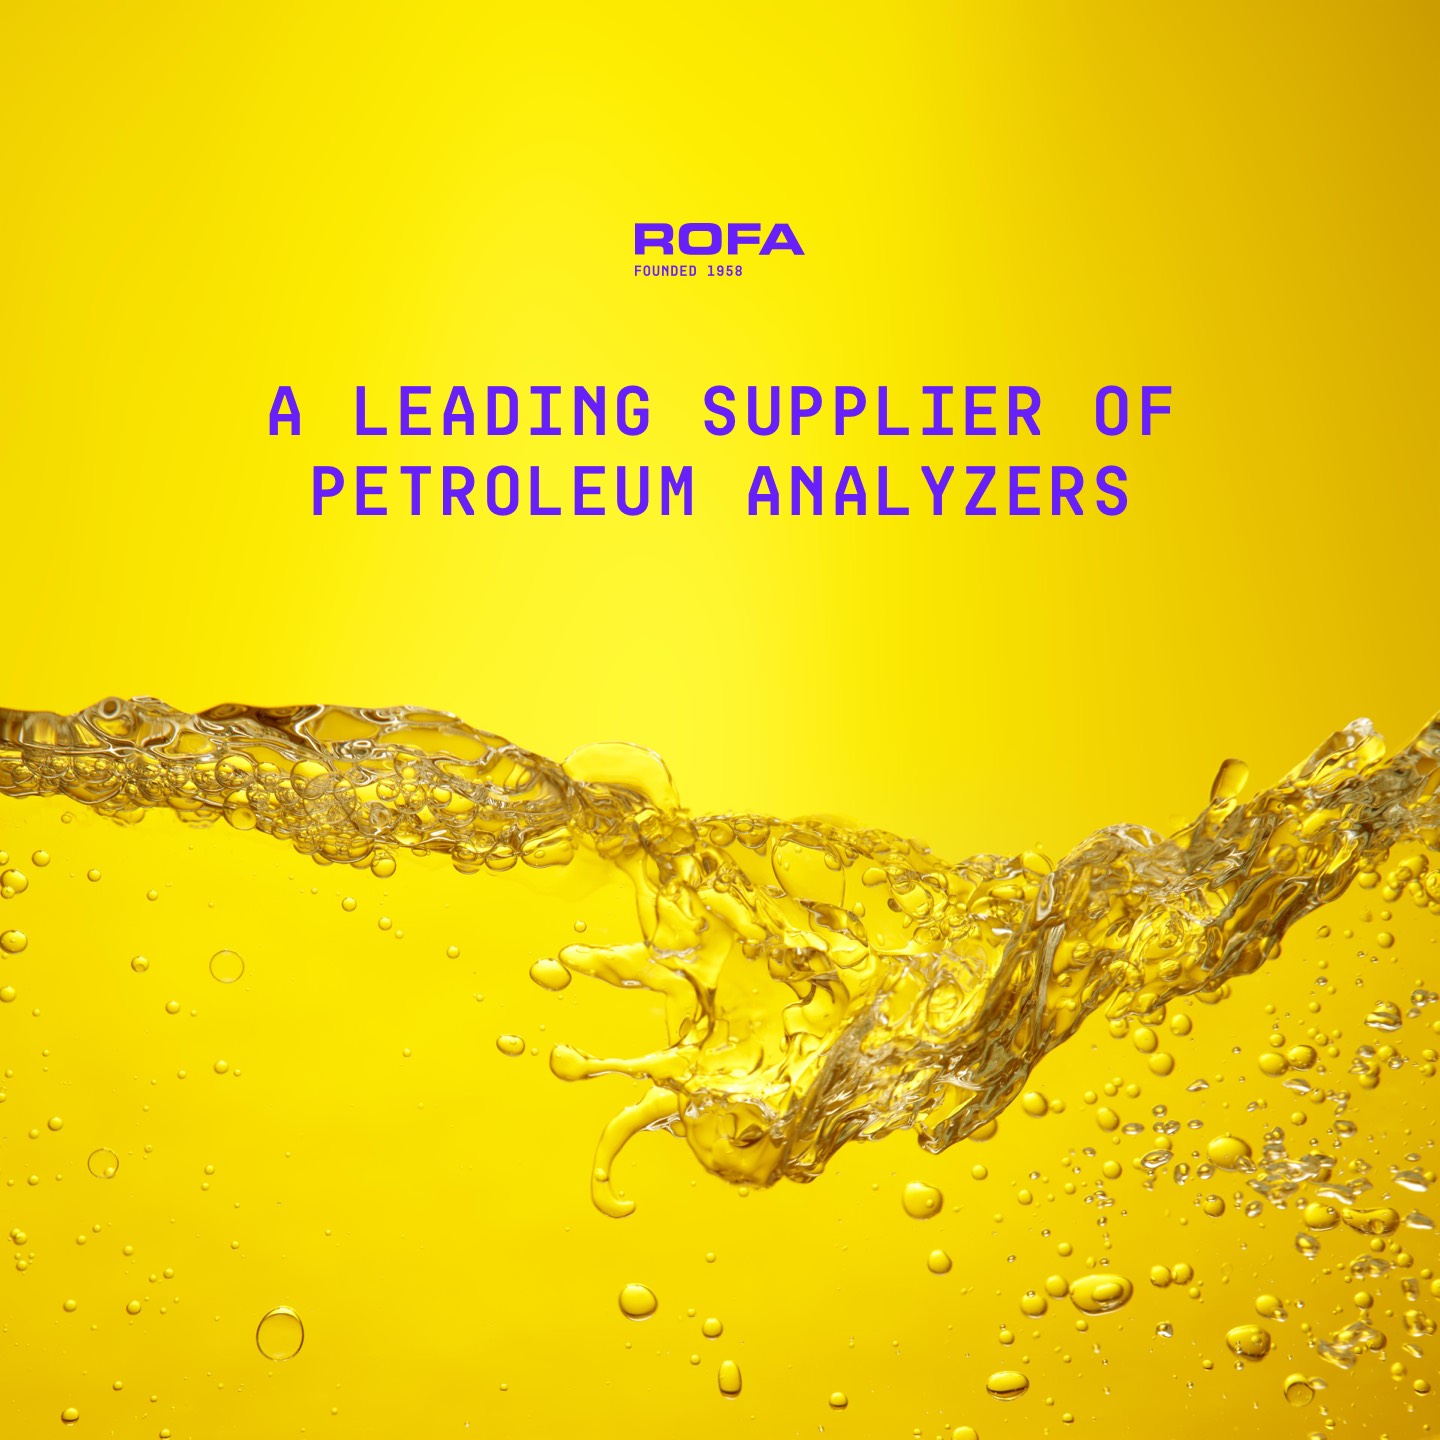 The keyvisual of ROFA – detail photography of petroleum on a yellow background